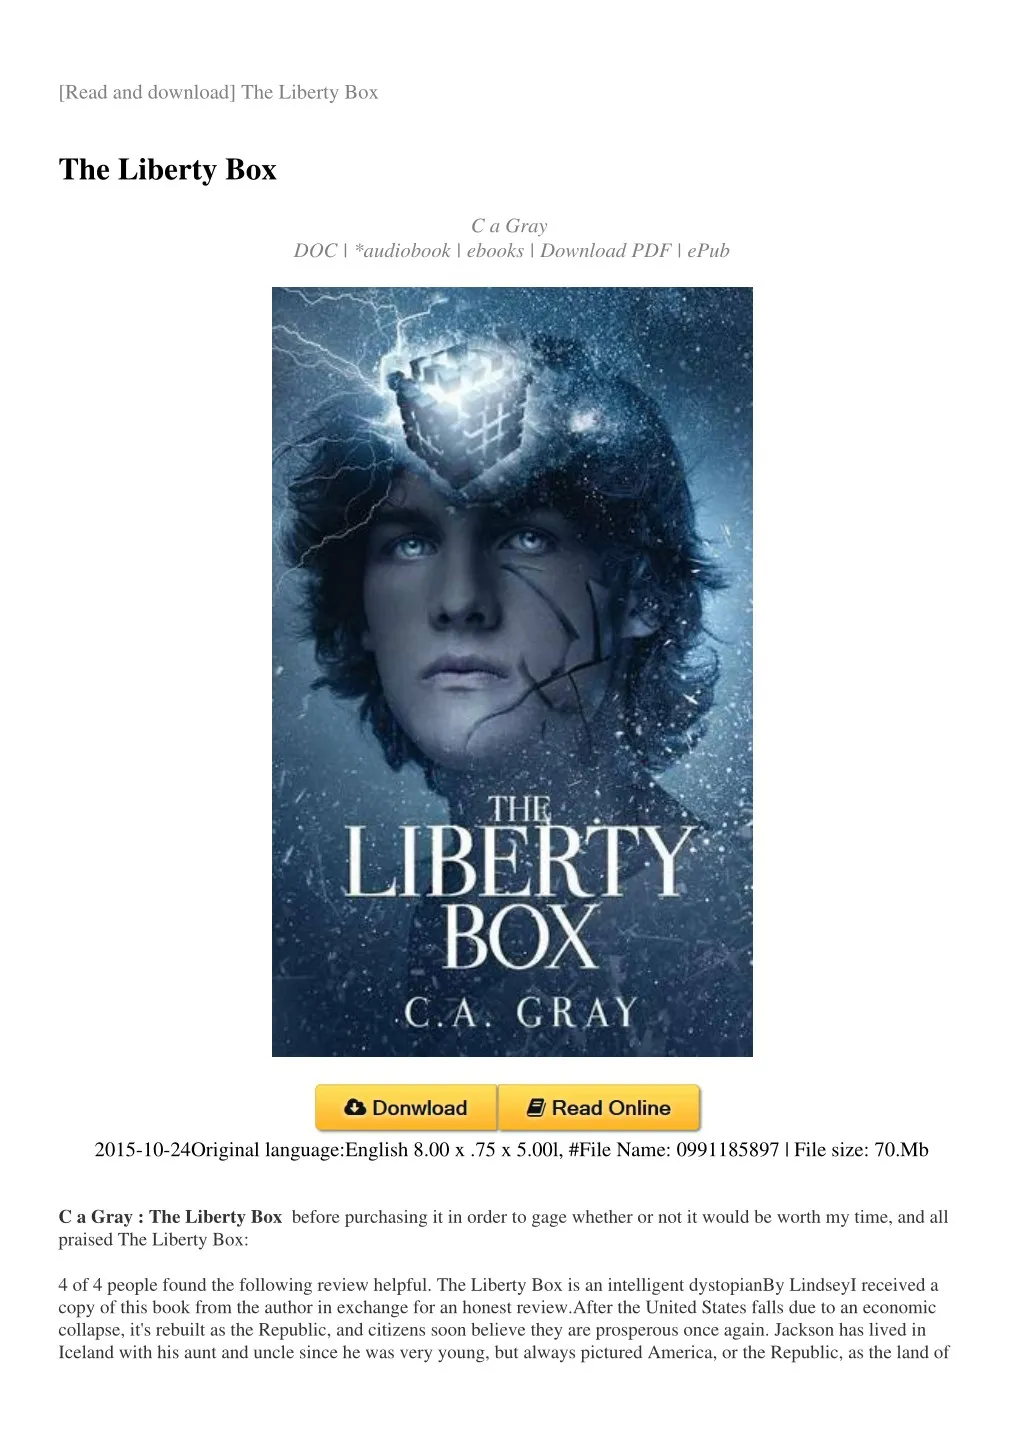 read and download the liberty box